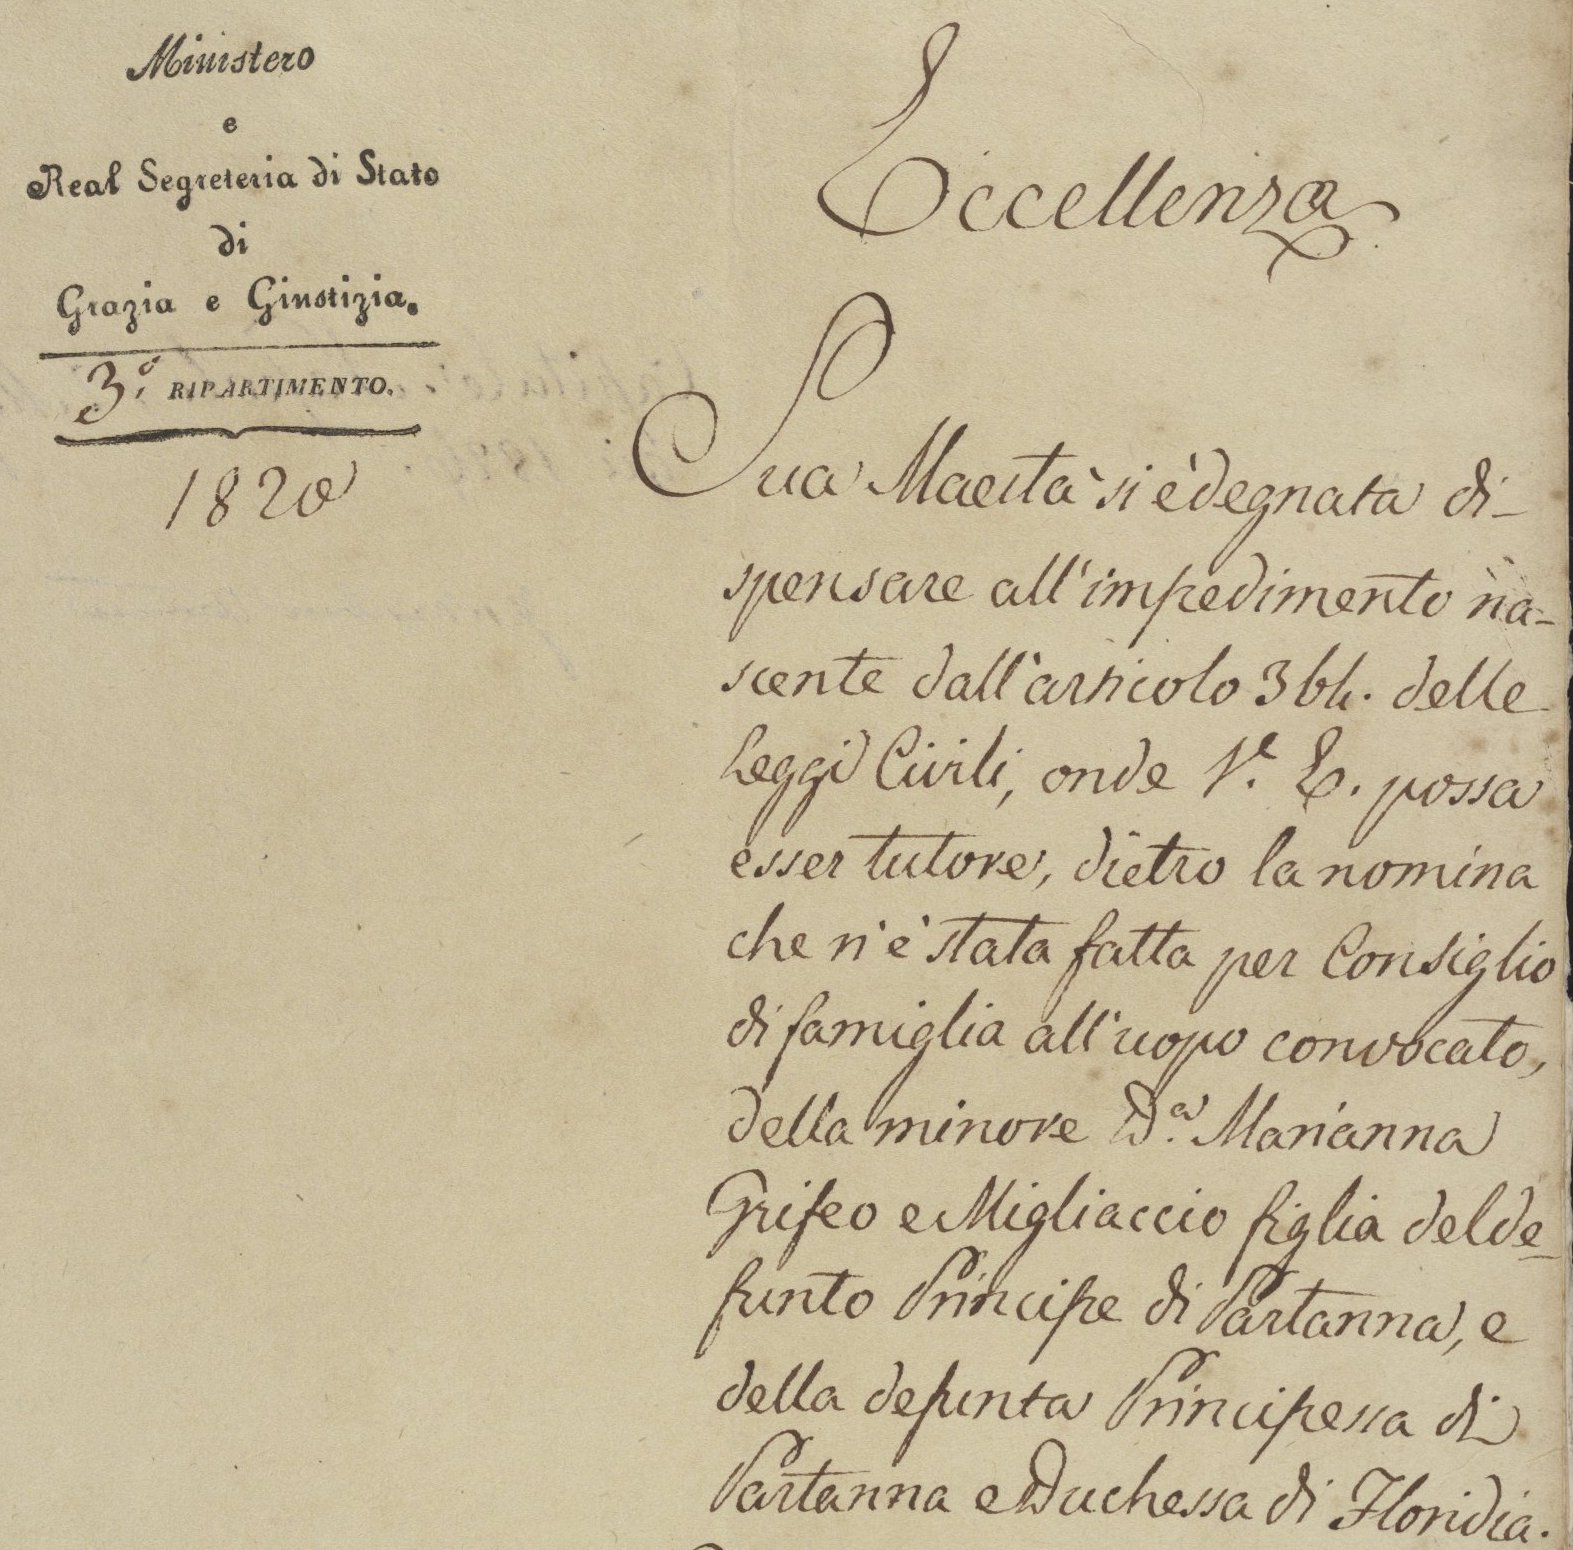 Letter written by an unidentified sender to Diego Naselli of Naples, pertaining to the guardianship and inheritance of Princess Marianna Grifeo di Partanna, daughter of Prince Leopoldo Grifeo di Partanna